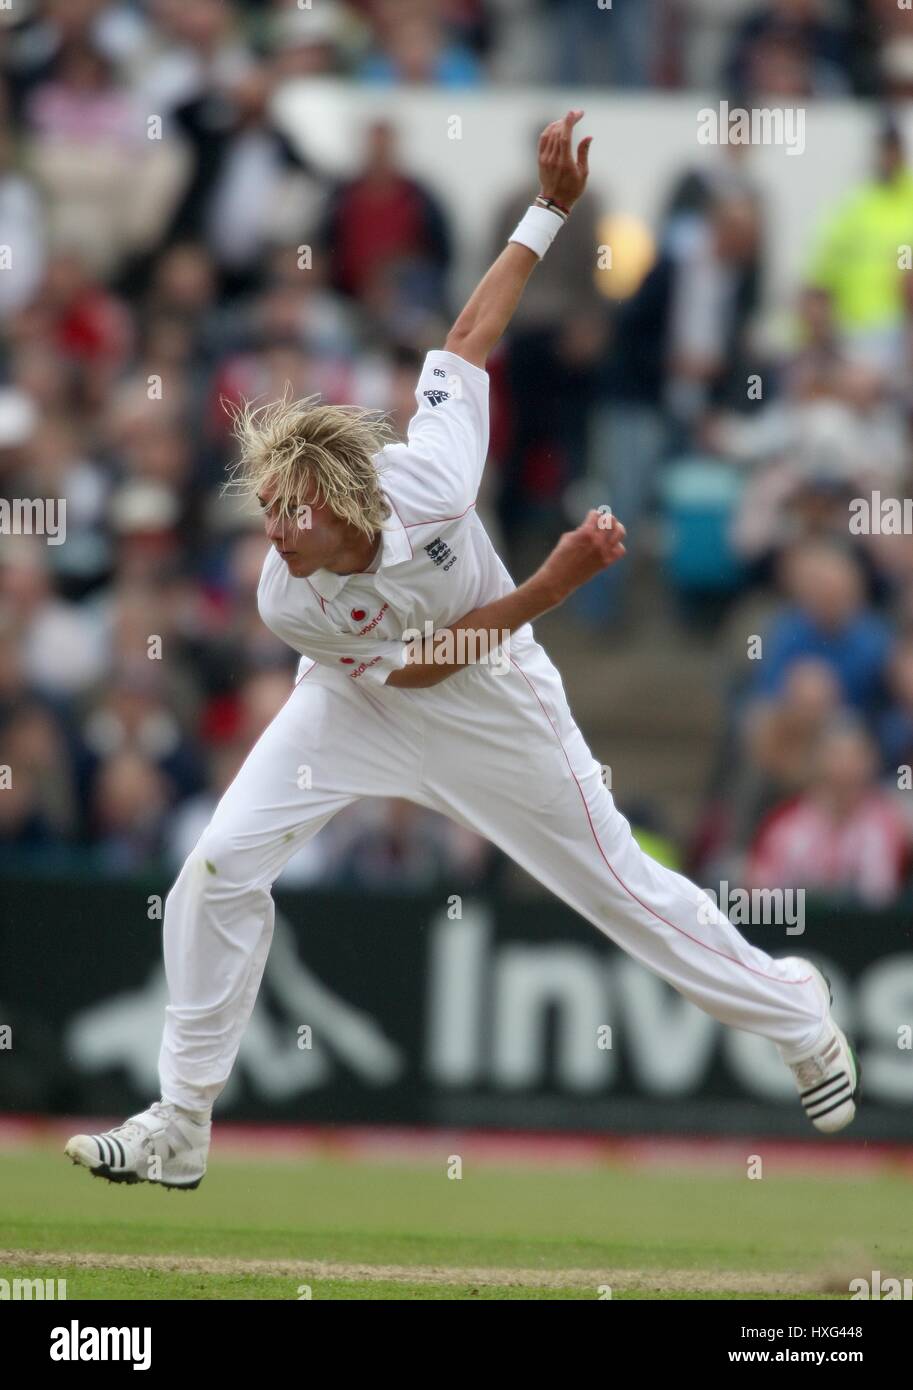 STUART BROAD ENGLAND & NOTTINGHAMSHIRE CCC OLD TRAFFORD MANCHESTER ENGALND 23 May 2008 Stock Photo